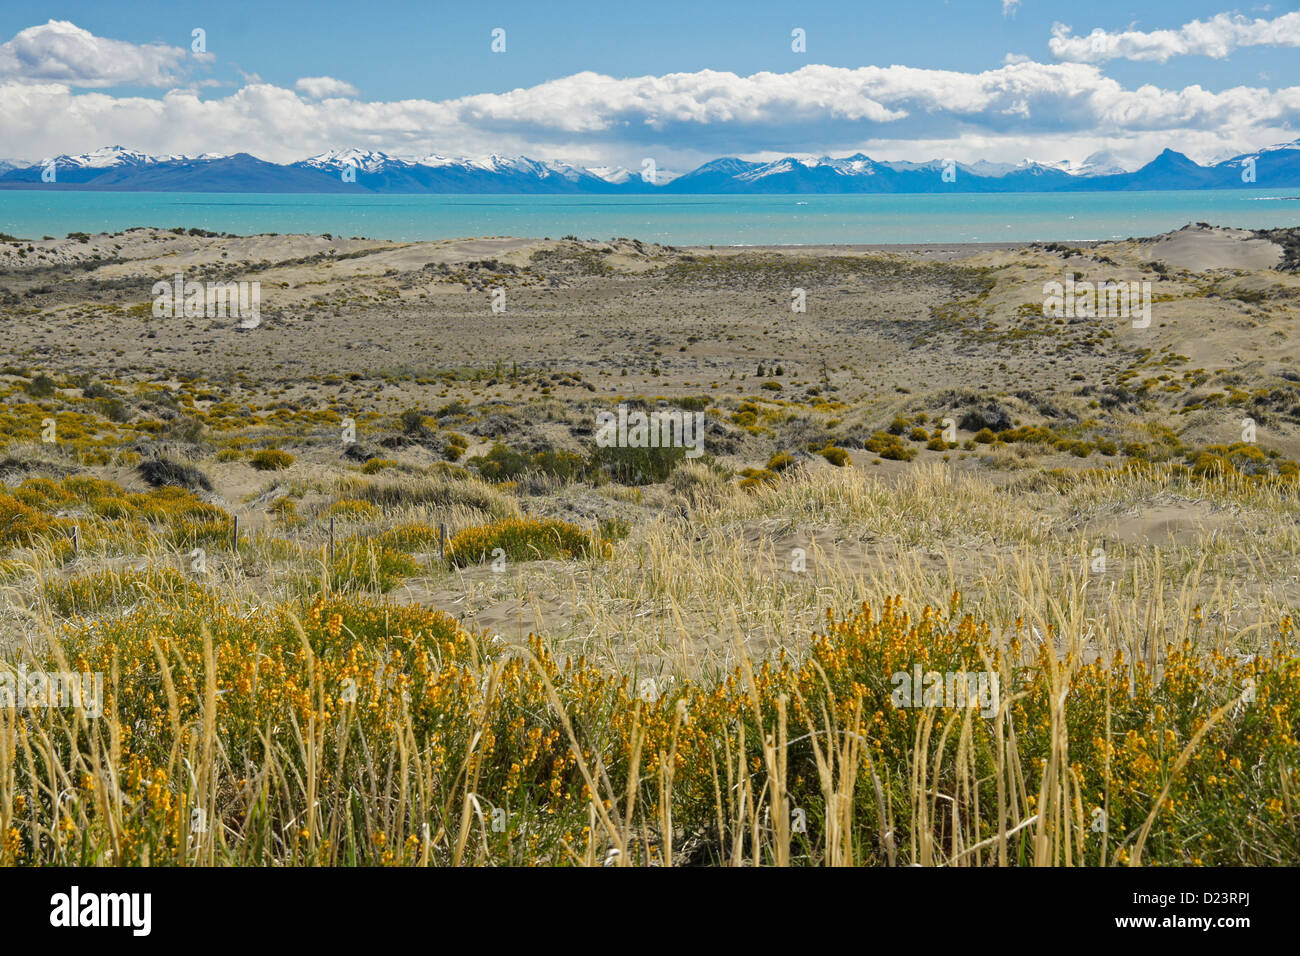 Lago Viedma and Andes Mountains, Patagonia, Argentina Stock Photo